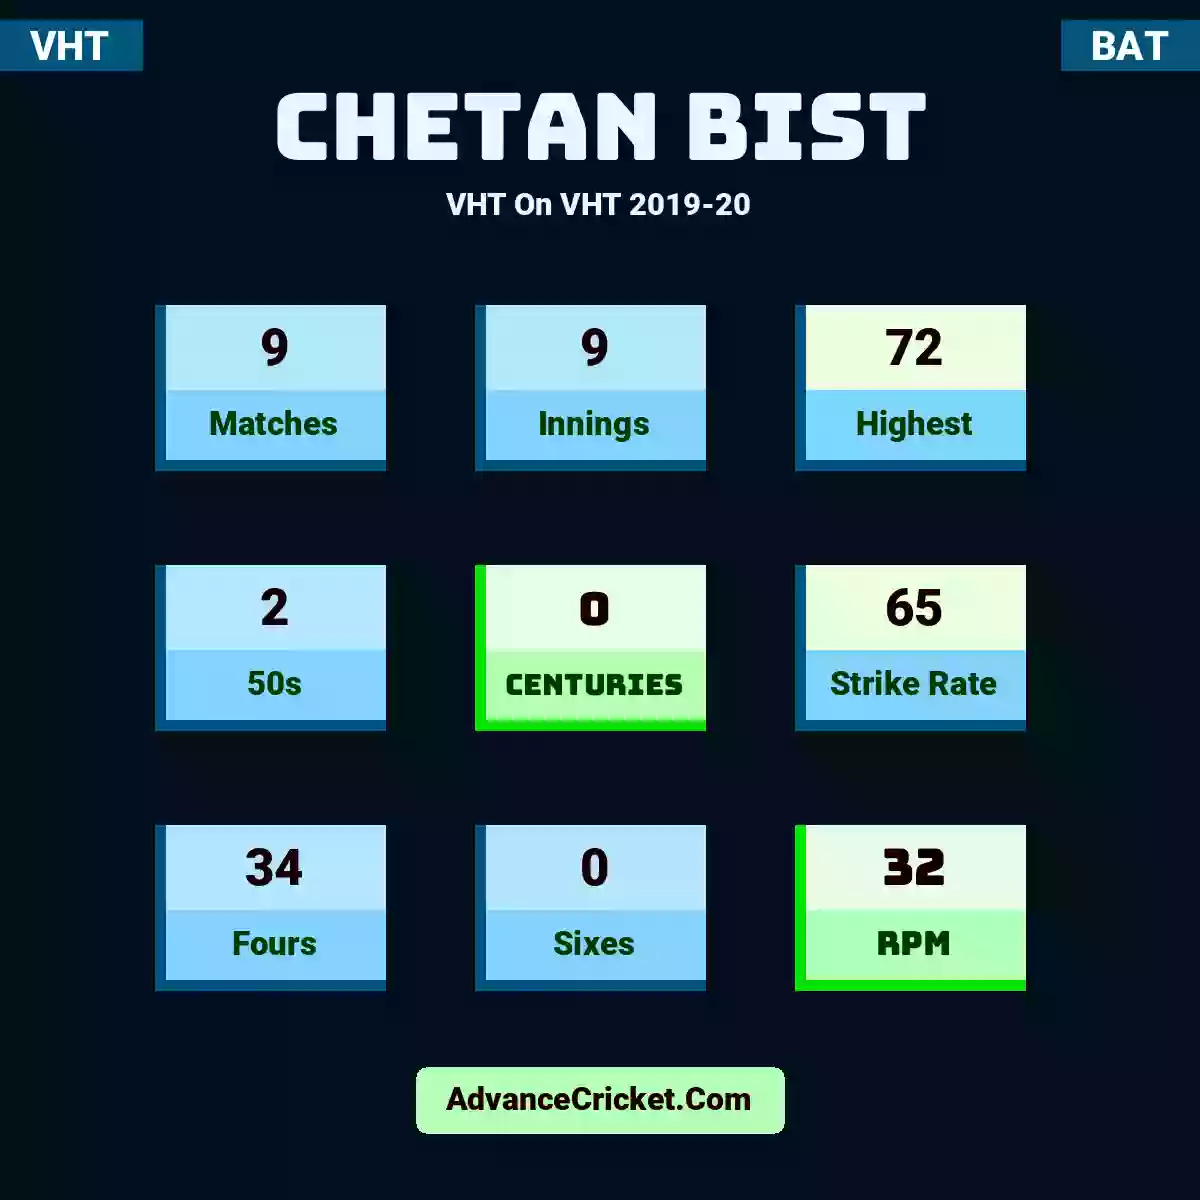 Chetan Bist VHT  On VHT 2019-20, Chetan Bist played 9 matches, scored 72 runs as highest, 2 half-centuries, and 0 centuries, with a strike rate of 65. C.Bist hit 34 fours and 0 sixes, with an RPM of 32.